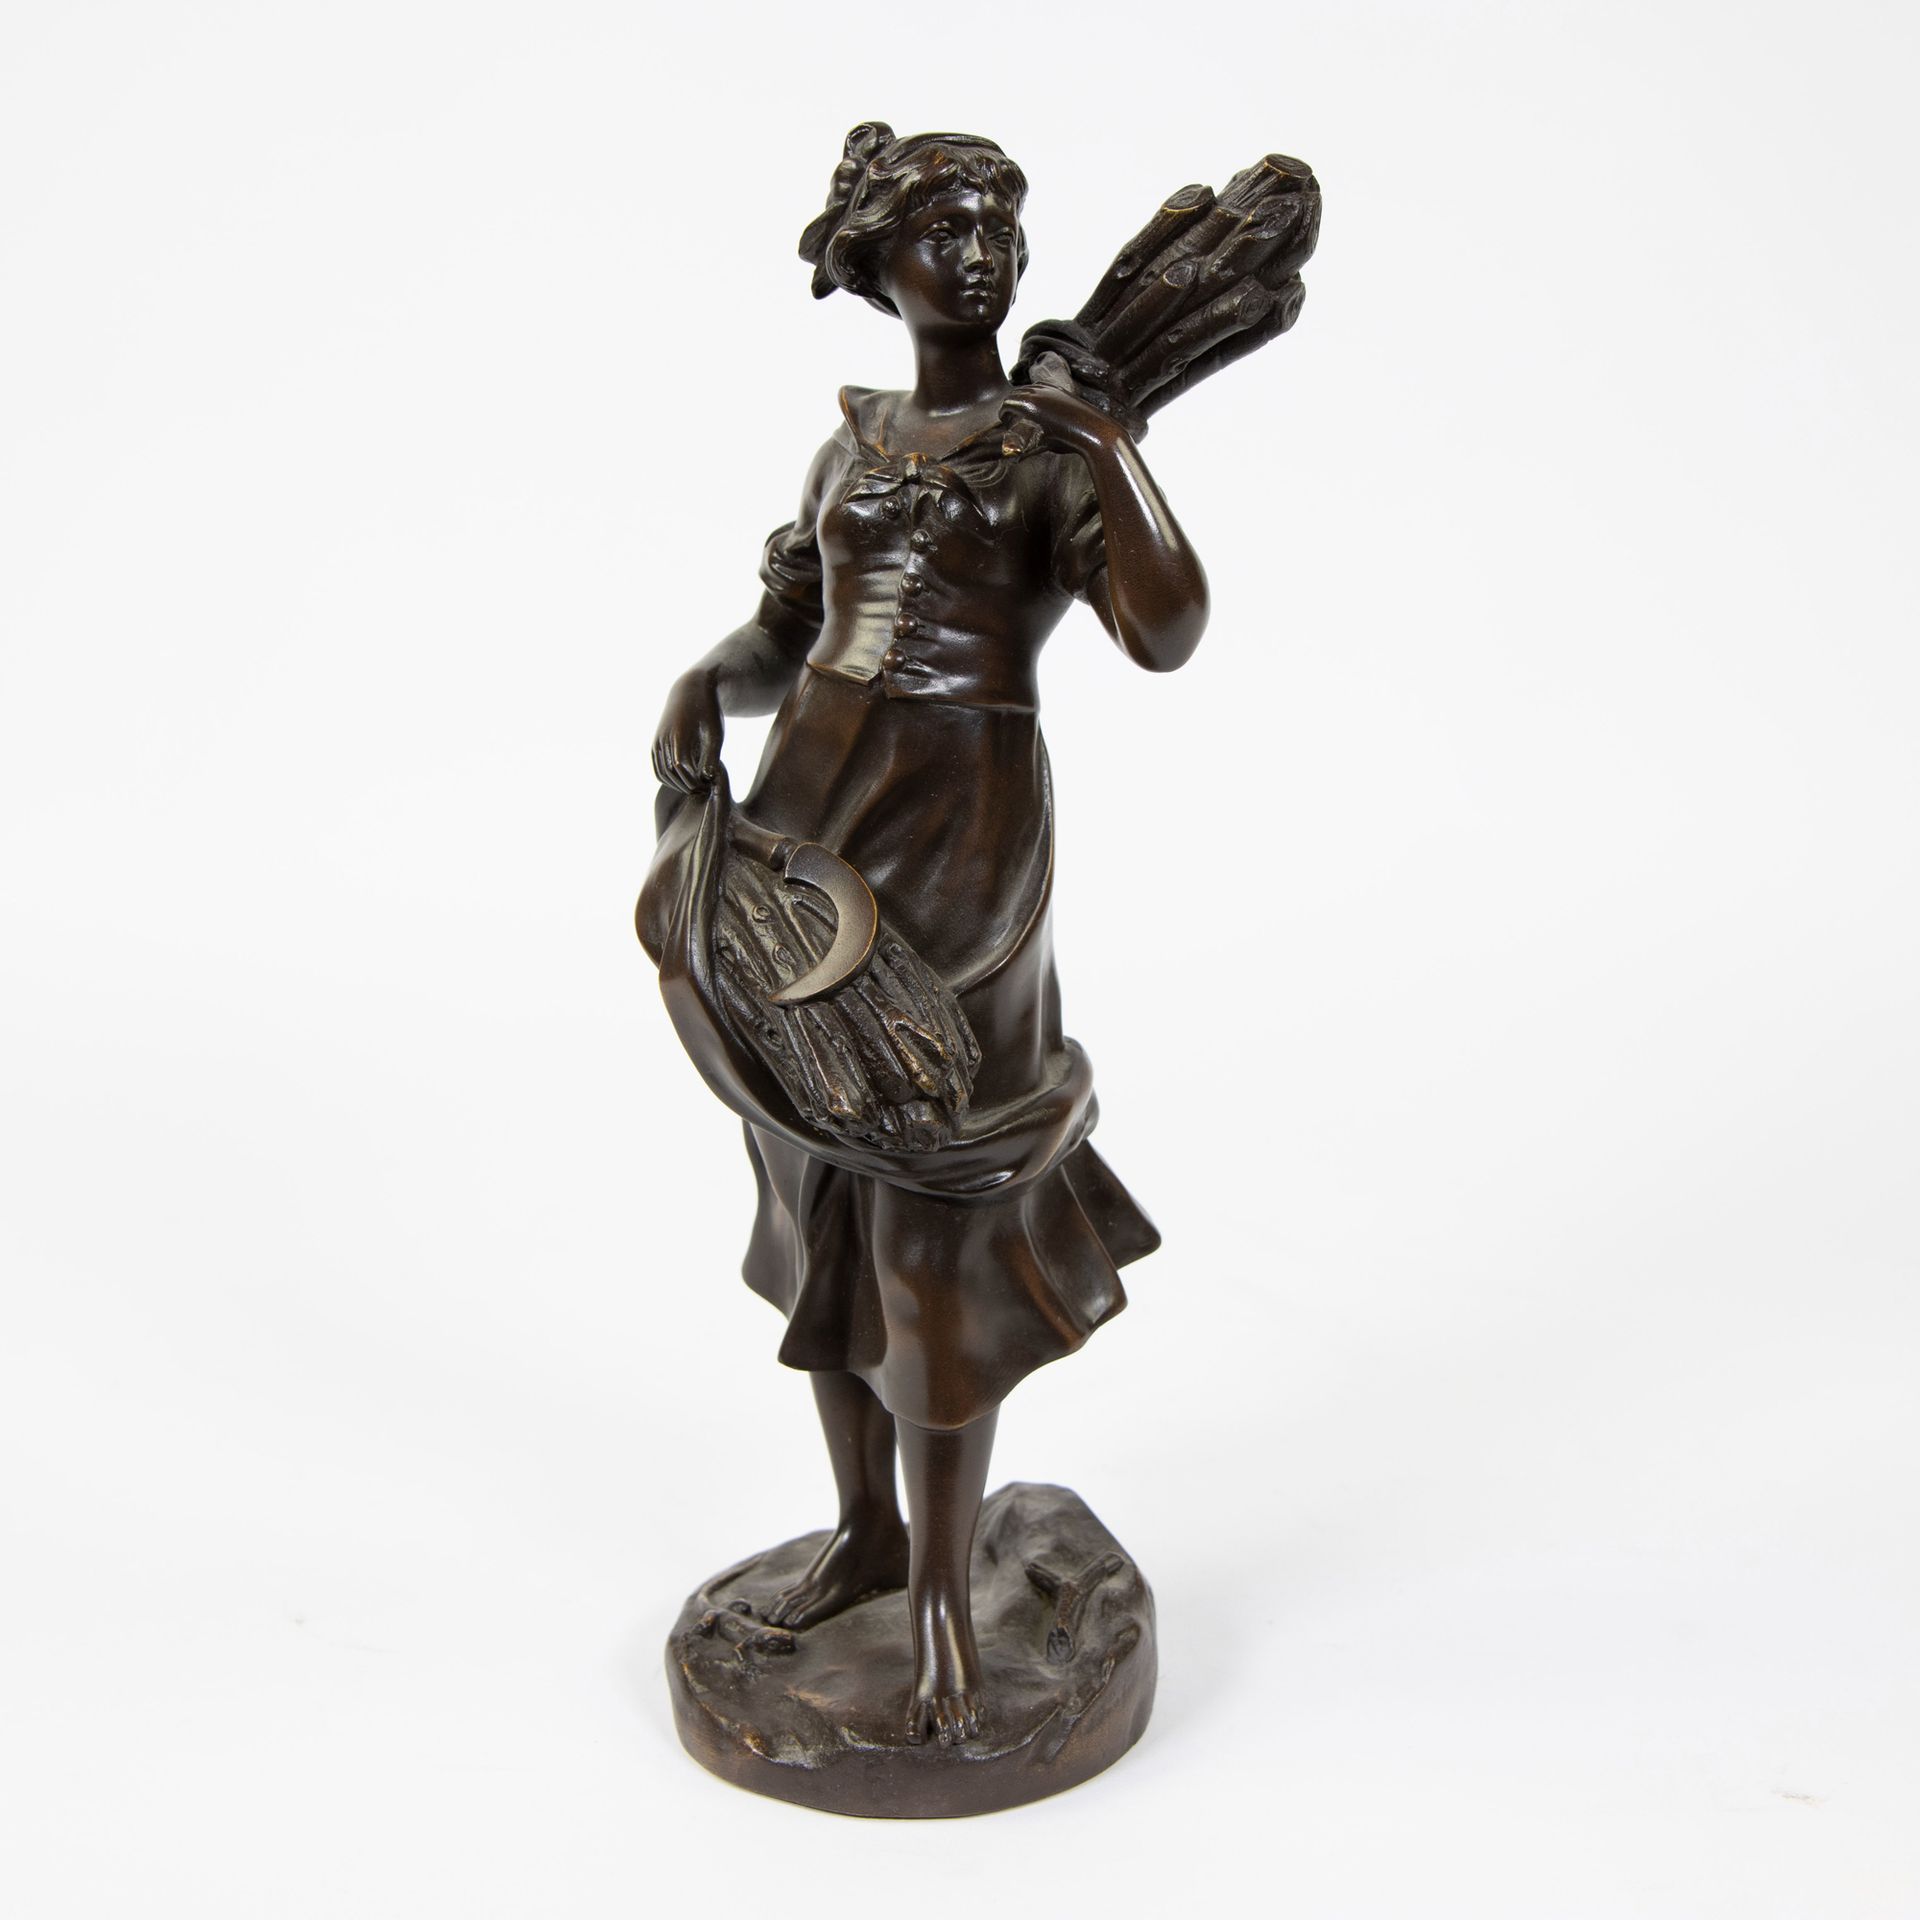 Null Henri GIRAUD (c.1805-1895)
Bronze The sower, signed

Brons La faucheuse, ge&hellip;